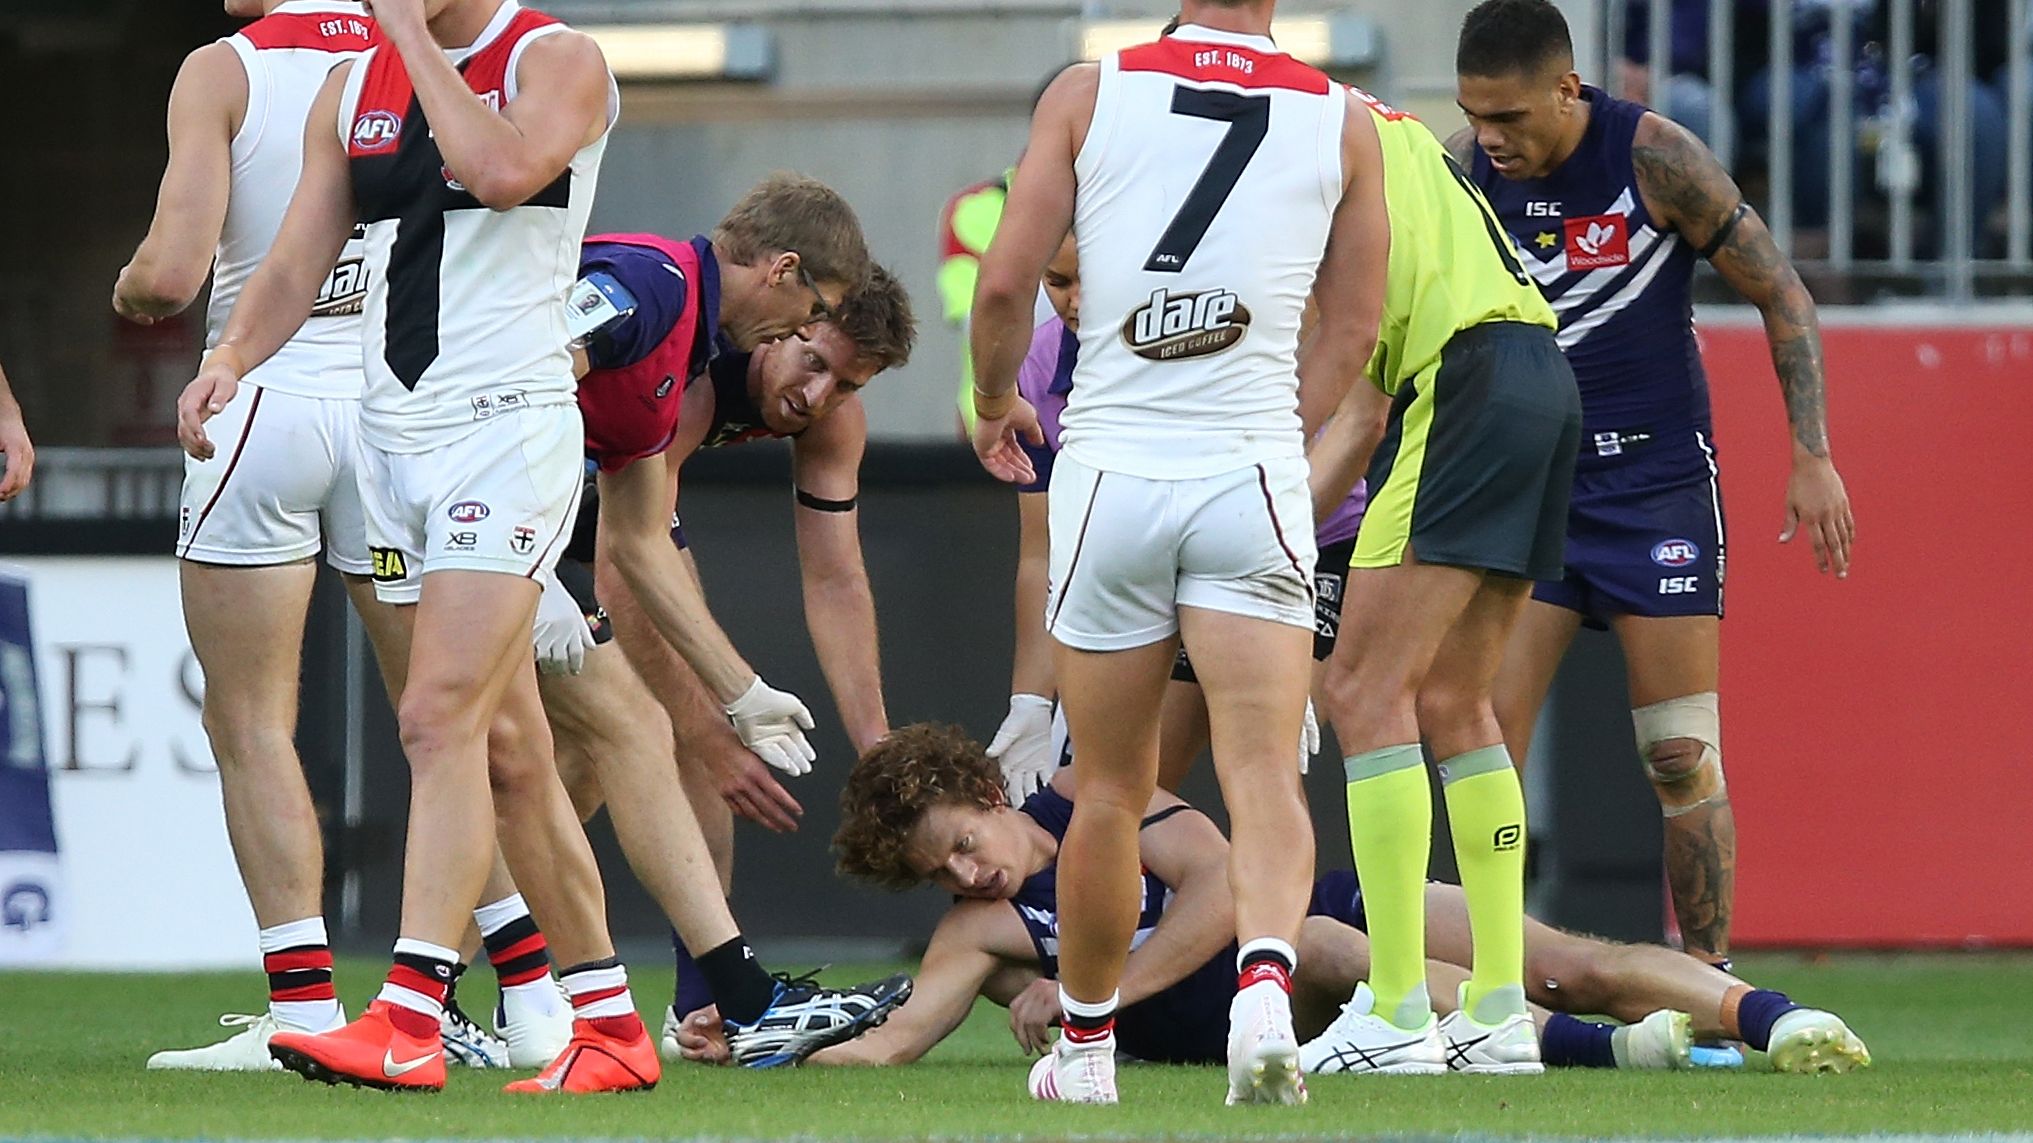 Nathan Fyfe of the Dockers is attended to by medical staff after being concussed in 2019 in Perth. (Photo by Paul Kane/Getty Images)